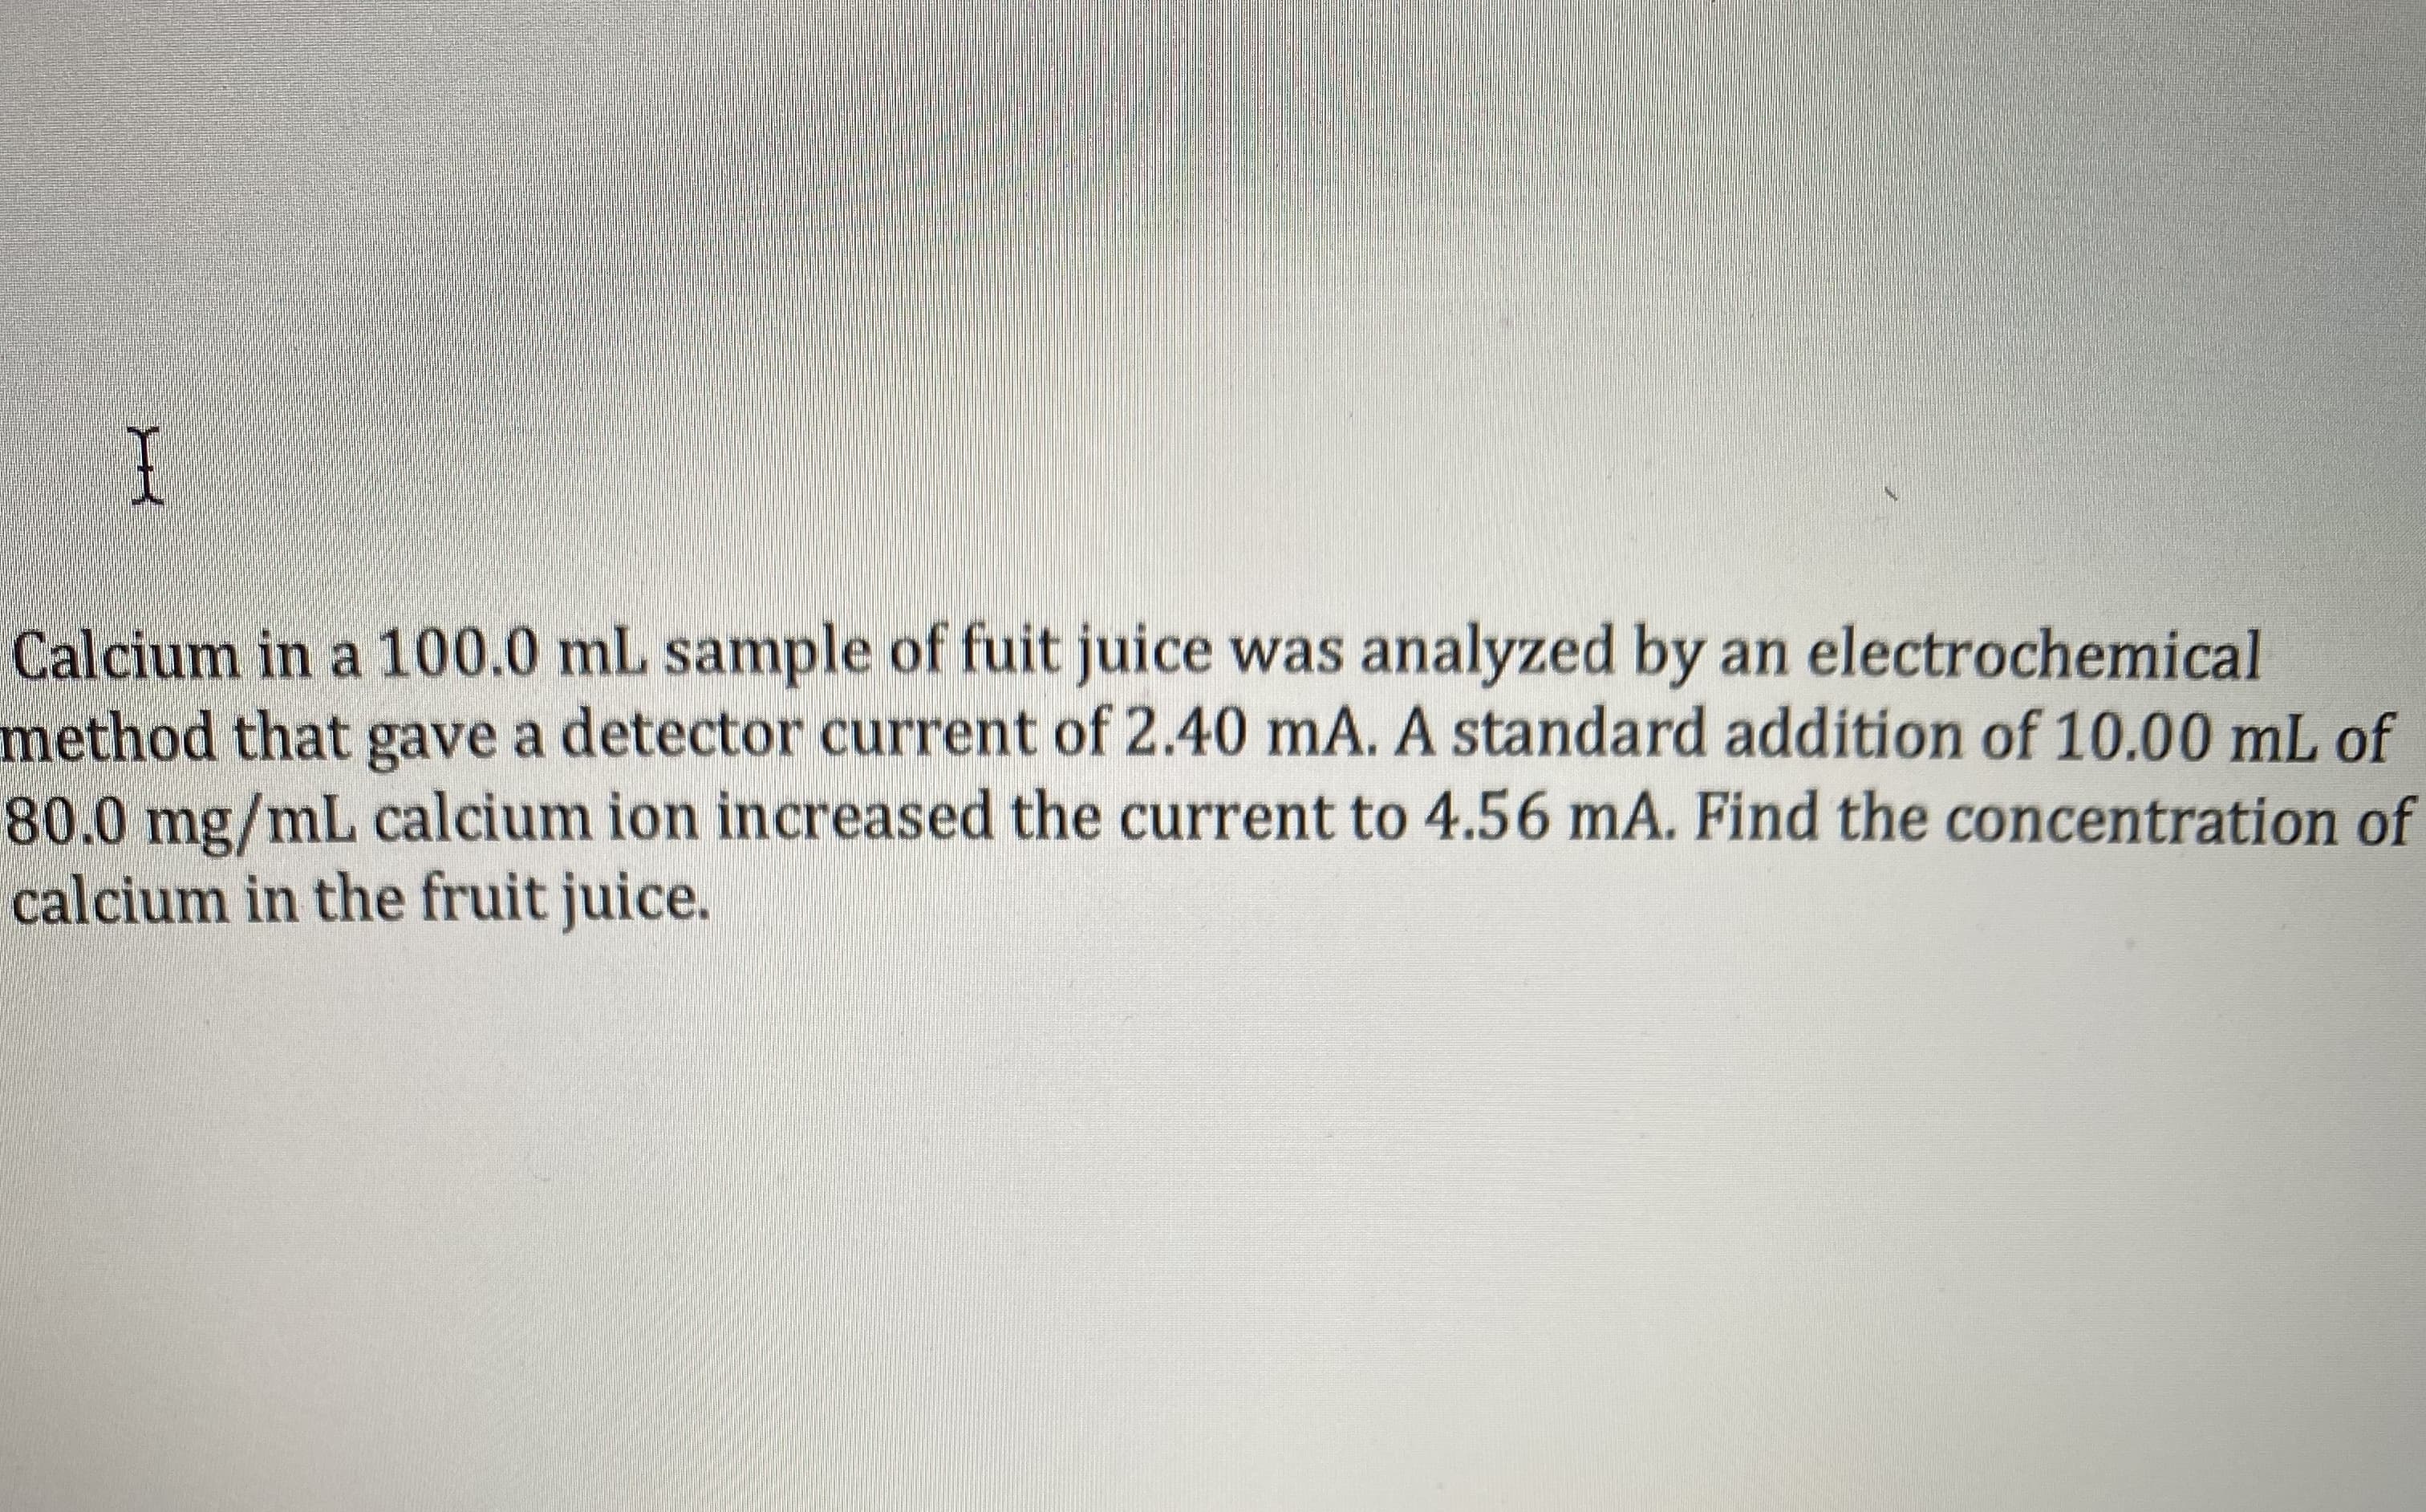 Calcium in a 100.0 mL sample of fuit juice was analyzed by an electrochemical
method that gave a detector current of 2.40 mA. A standard addition of 10.00 mL of
80.0mg/mL calcium ion increased the current to 4.56 mA. Find the concentration of
calcium in the fruit juice.
